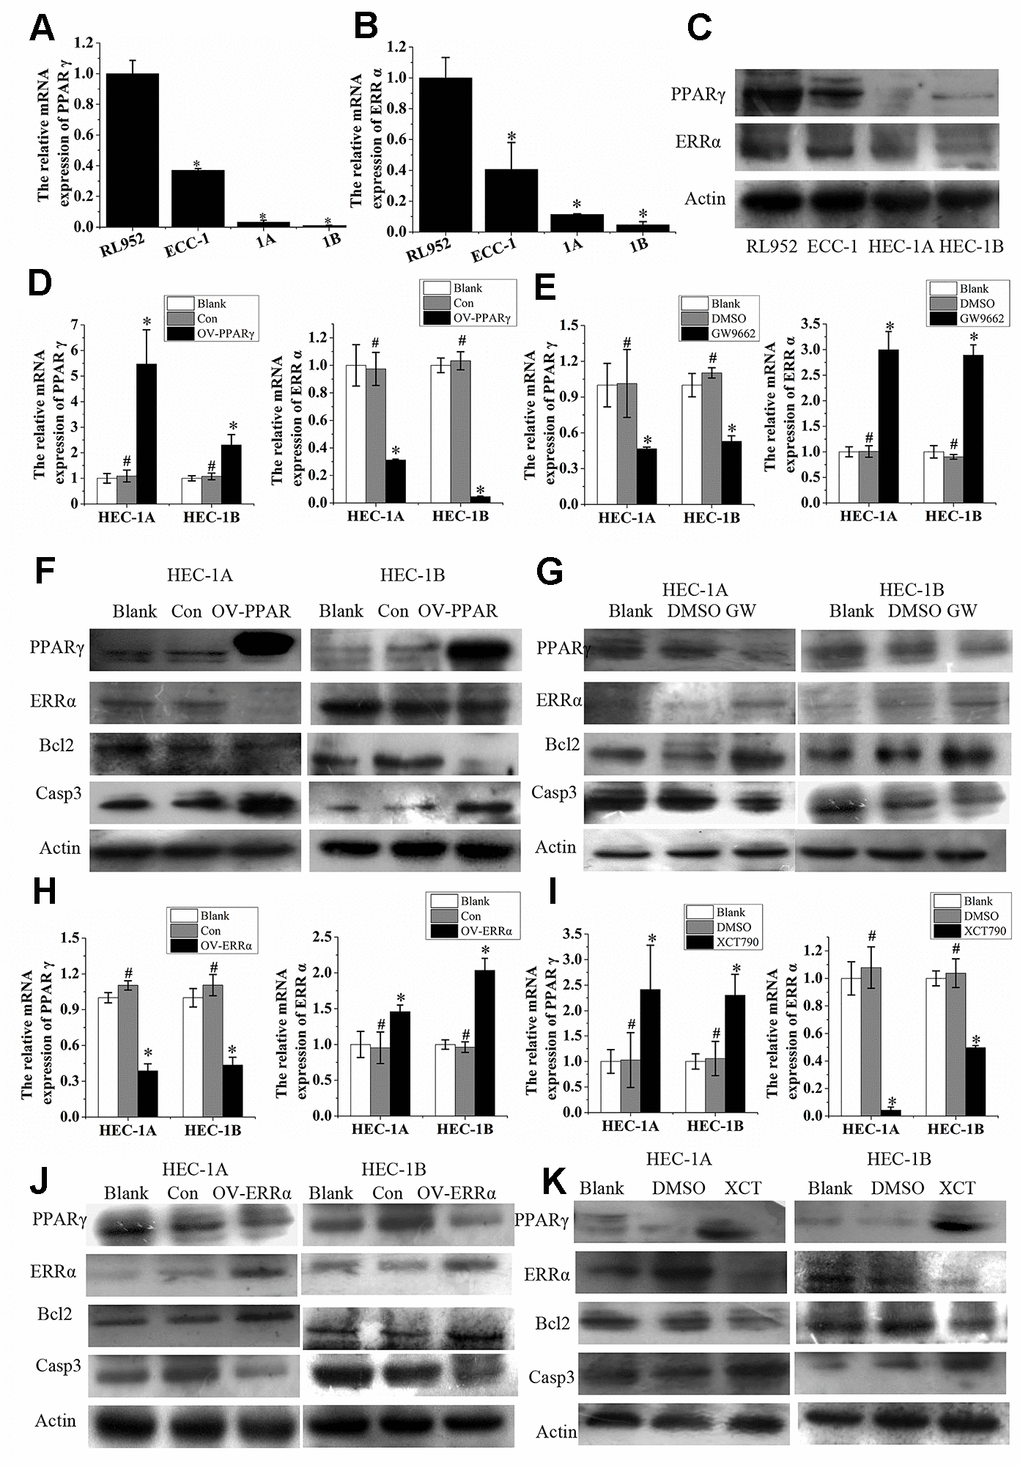 ERRα and PPAR γ negatively regulate each other in EC cells. (A) The relative mRNA expression of PPARγ and (B) the relative mRNA expression of ERRα in RL952, ECC-1, HEC-1A, and HEC-1B cells. (C) Protein expression of PPAR γ and ERRα in RL952, ECC-1, HEC-1A, and HEC-1B cells. (D) Upregulated PPARγ and (E) suppressed PPARγ by GW9662: the relative mRNA expression of PPARγ and ERRα in EC cells. (F) Upregulated PPARγ and (G) suppressed PPARγ by GW9662: the protein expression of PPARγ and ERRα in EC cells. (H) Upregulated ERRα and (I) suppressed ERRα by XCT790: the relative mRNA expression of ERRα and PPARγ in EC cells. (J) Upregulated ERRα and (K) suppressed ERRα by XCT790: the protein expression of PPAR γ and ERRα in EC cells. OV-PPARγ, overexpression of PPARγ. OV-ERRα, overexpression of ERRα. EC, endometrial cancer. *, P0.05.